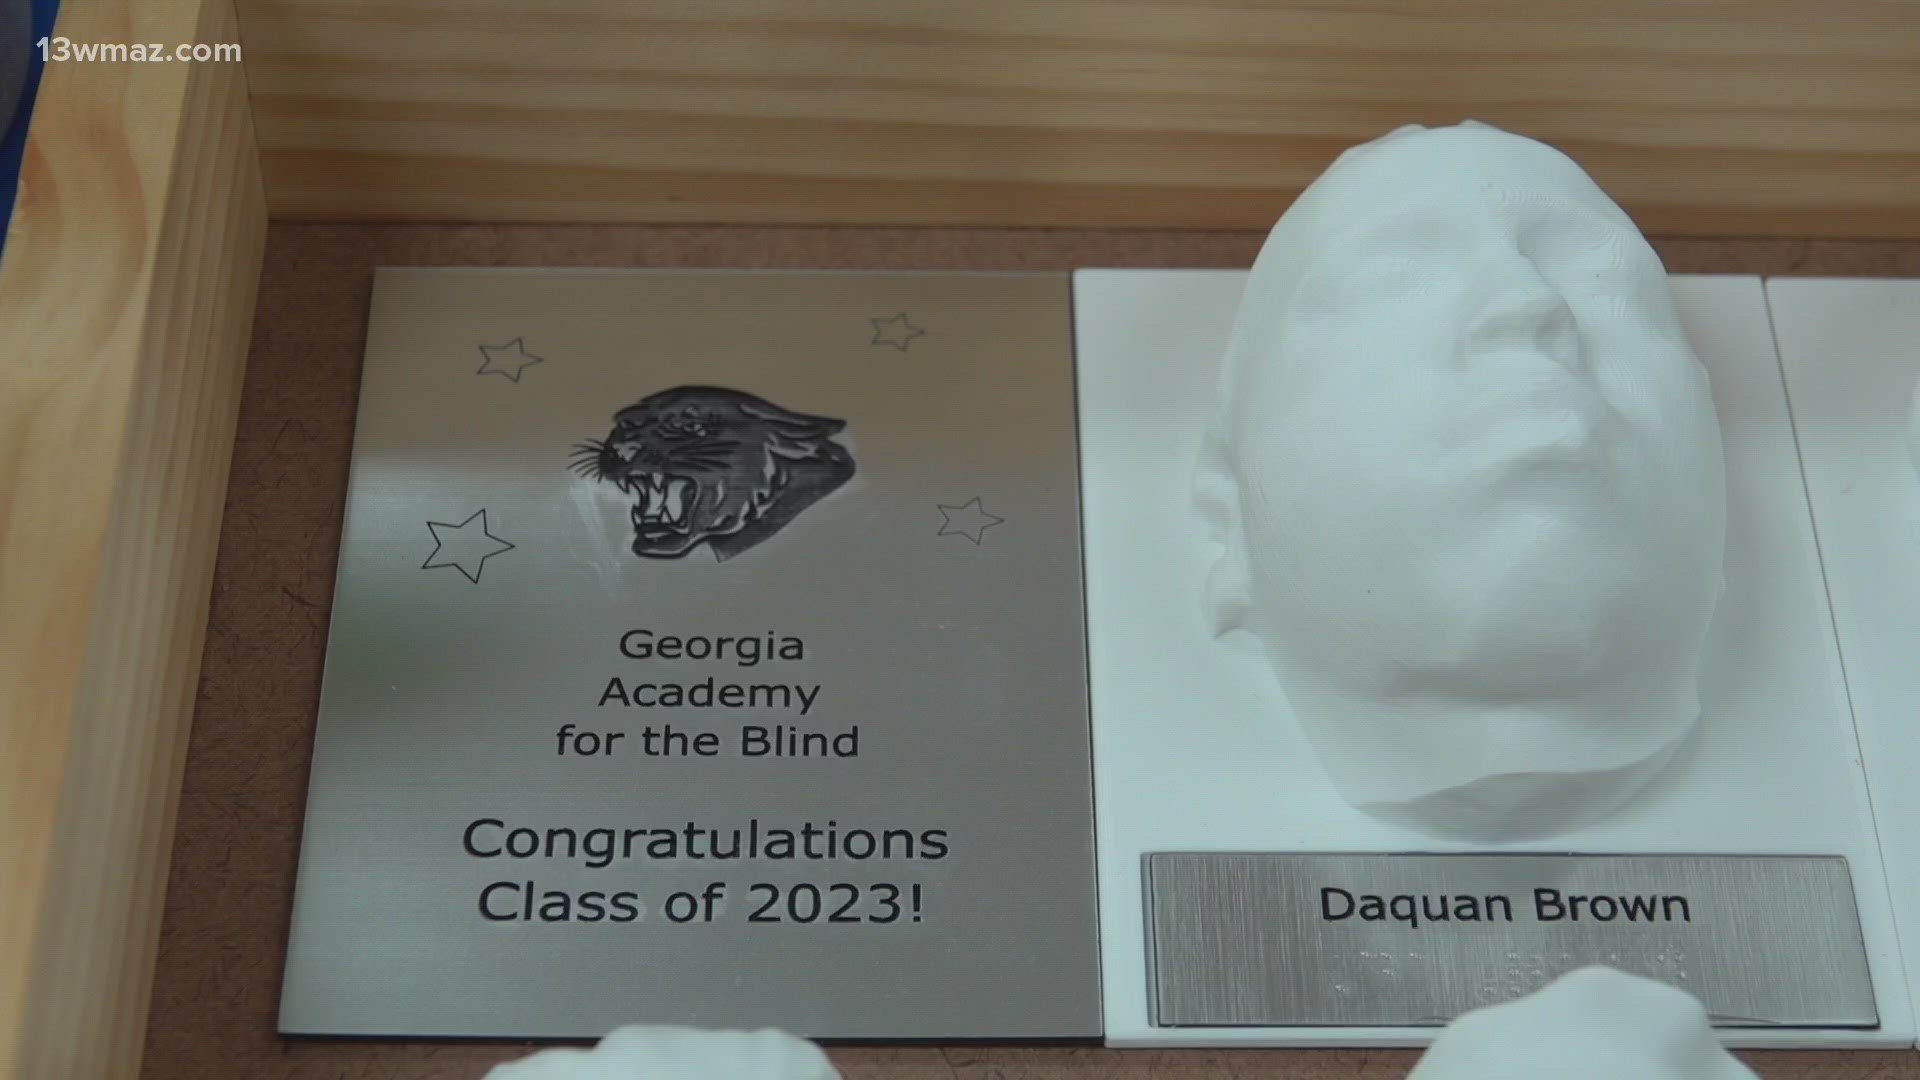 The yearbooks were wooden boxes with a 3D printed face model of each student and their names printed in braille.